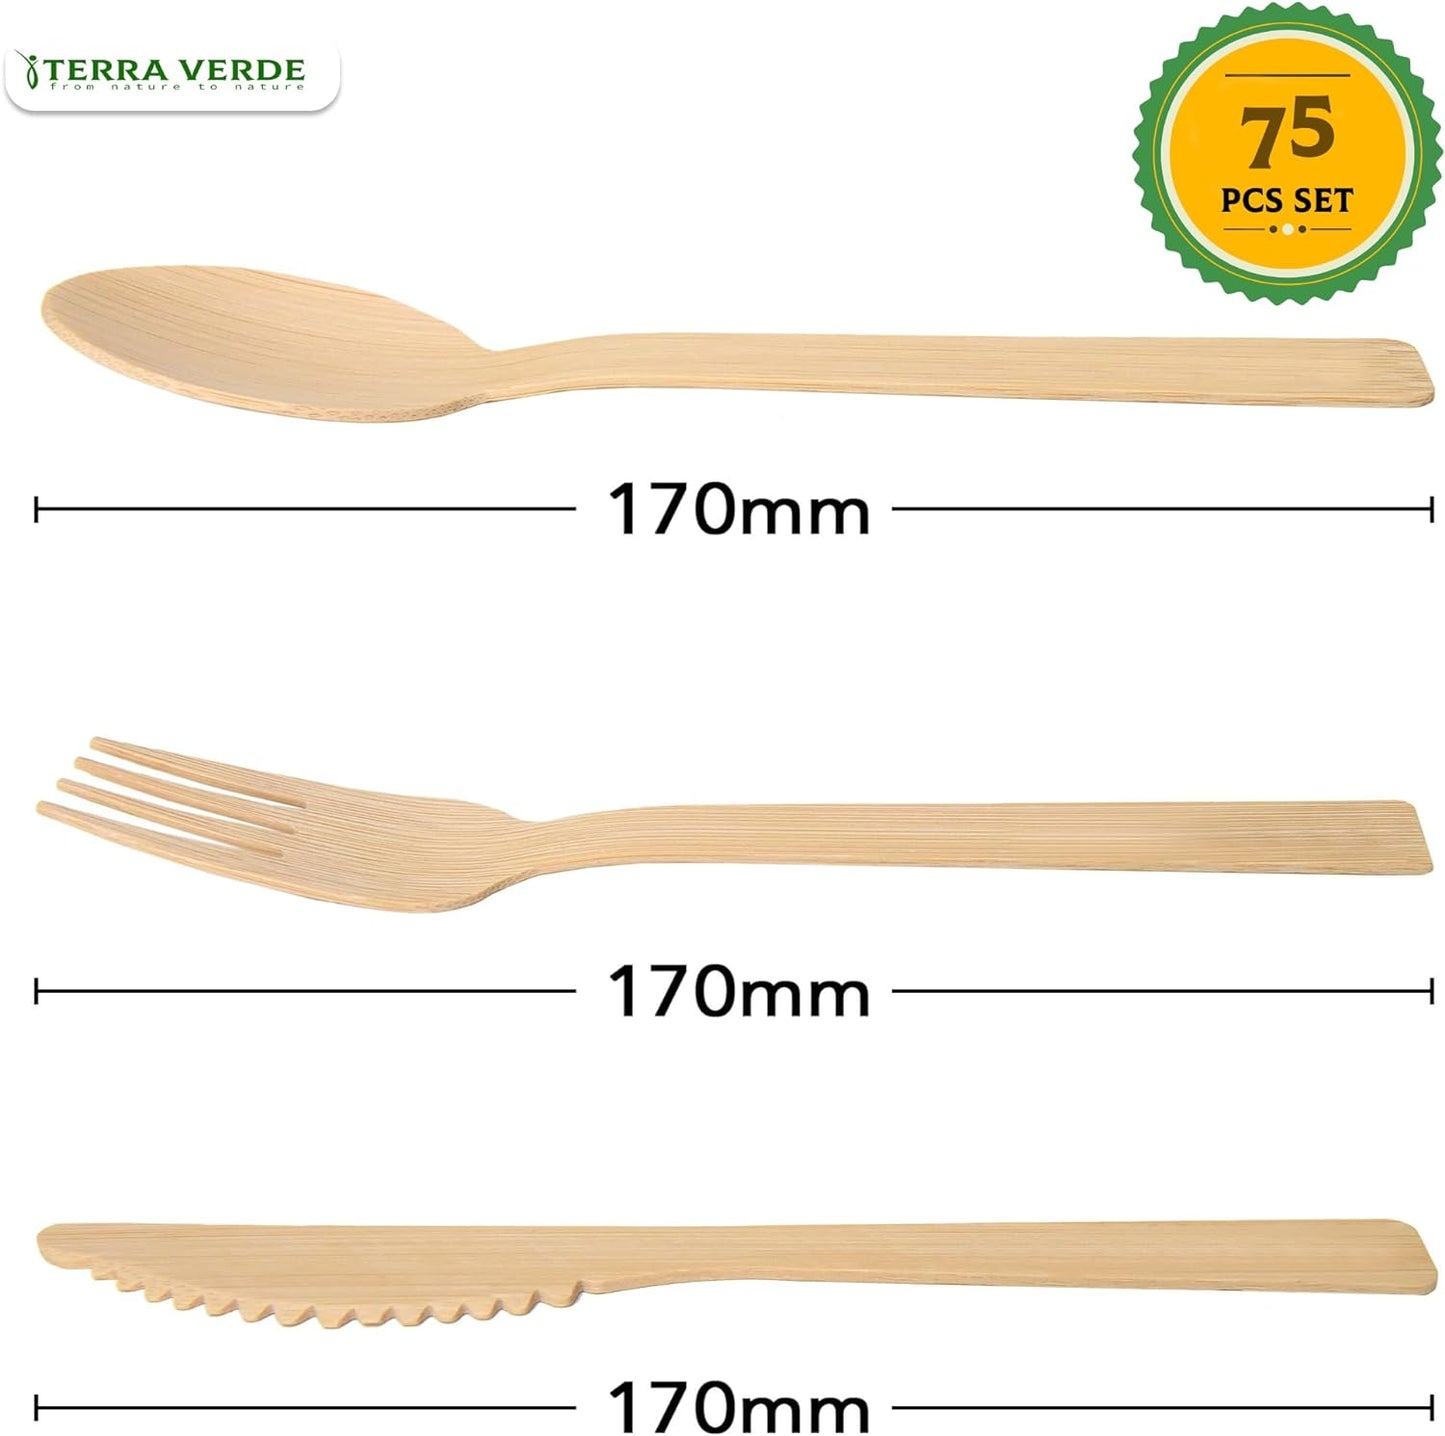 Disposable Bamboo Wooden Cutlery Set I 75 Piece of 25x Fork 25x Spoon 25x Knife I Eco Friendly Biodegradable Compostable I for Party Picnic BBQ Outdoor Events